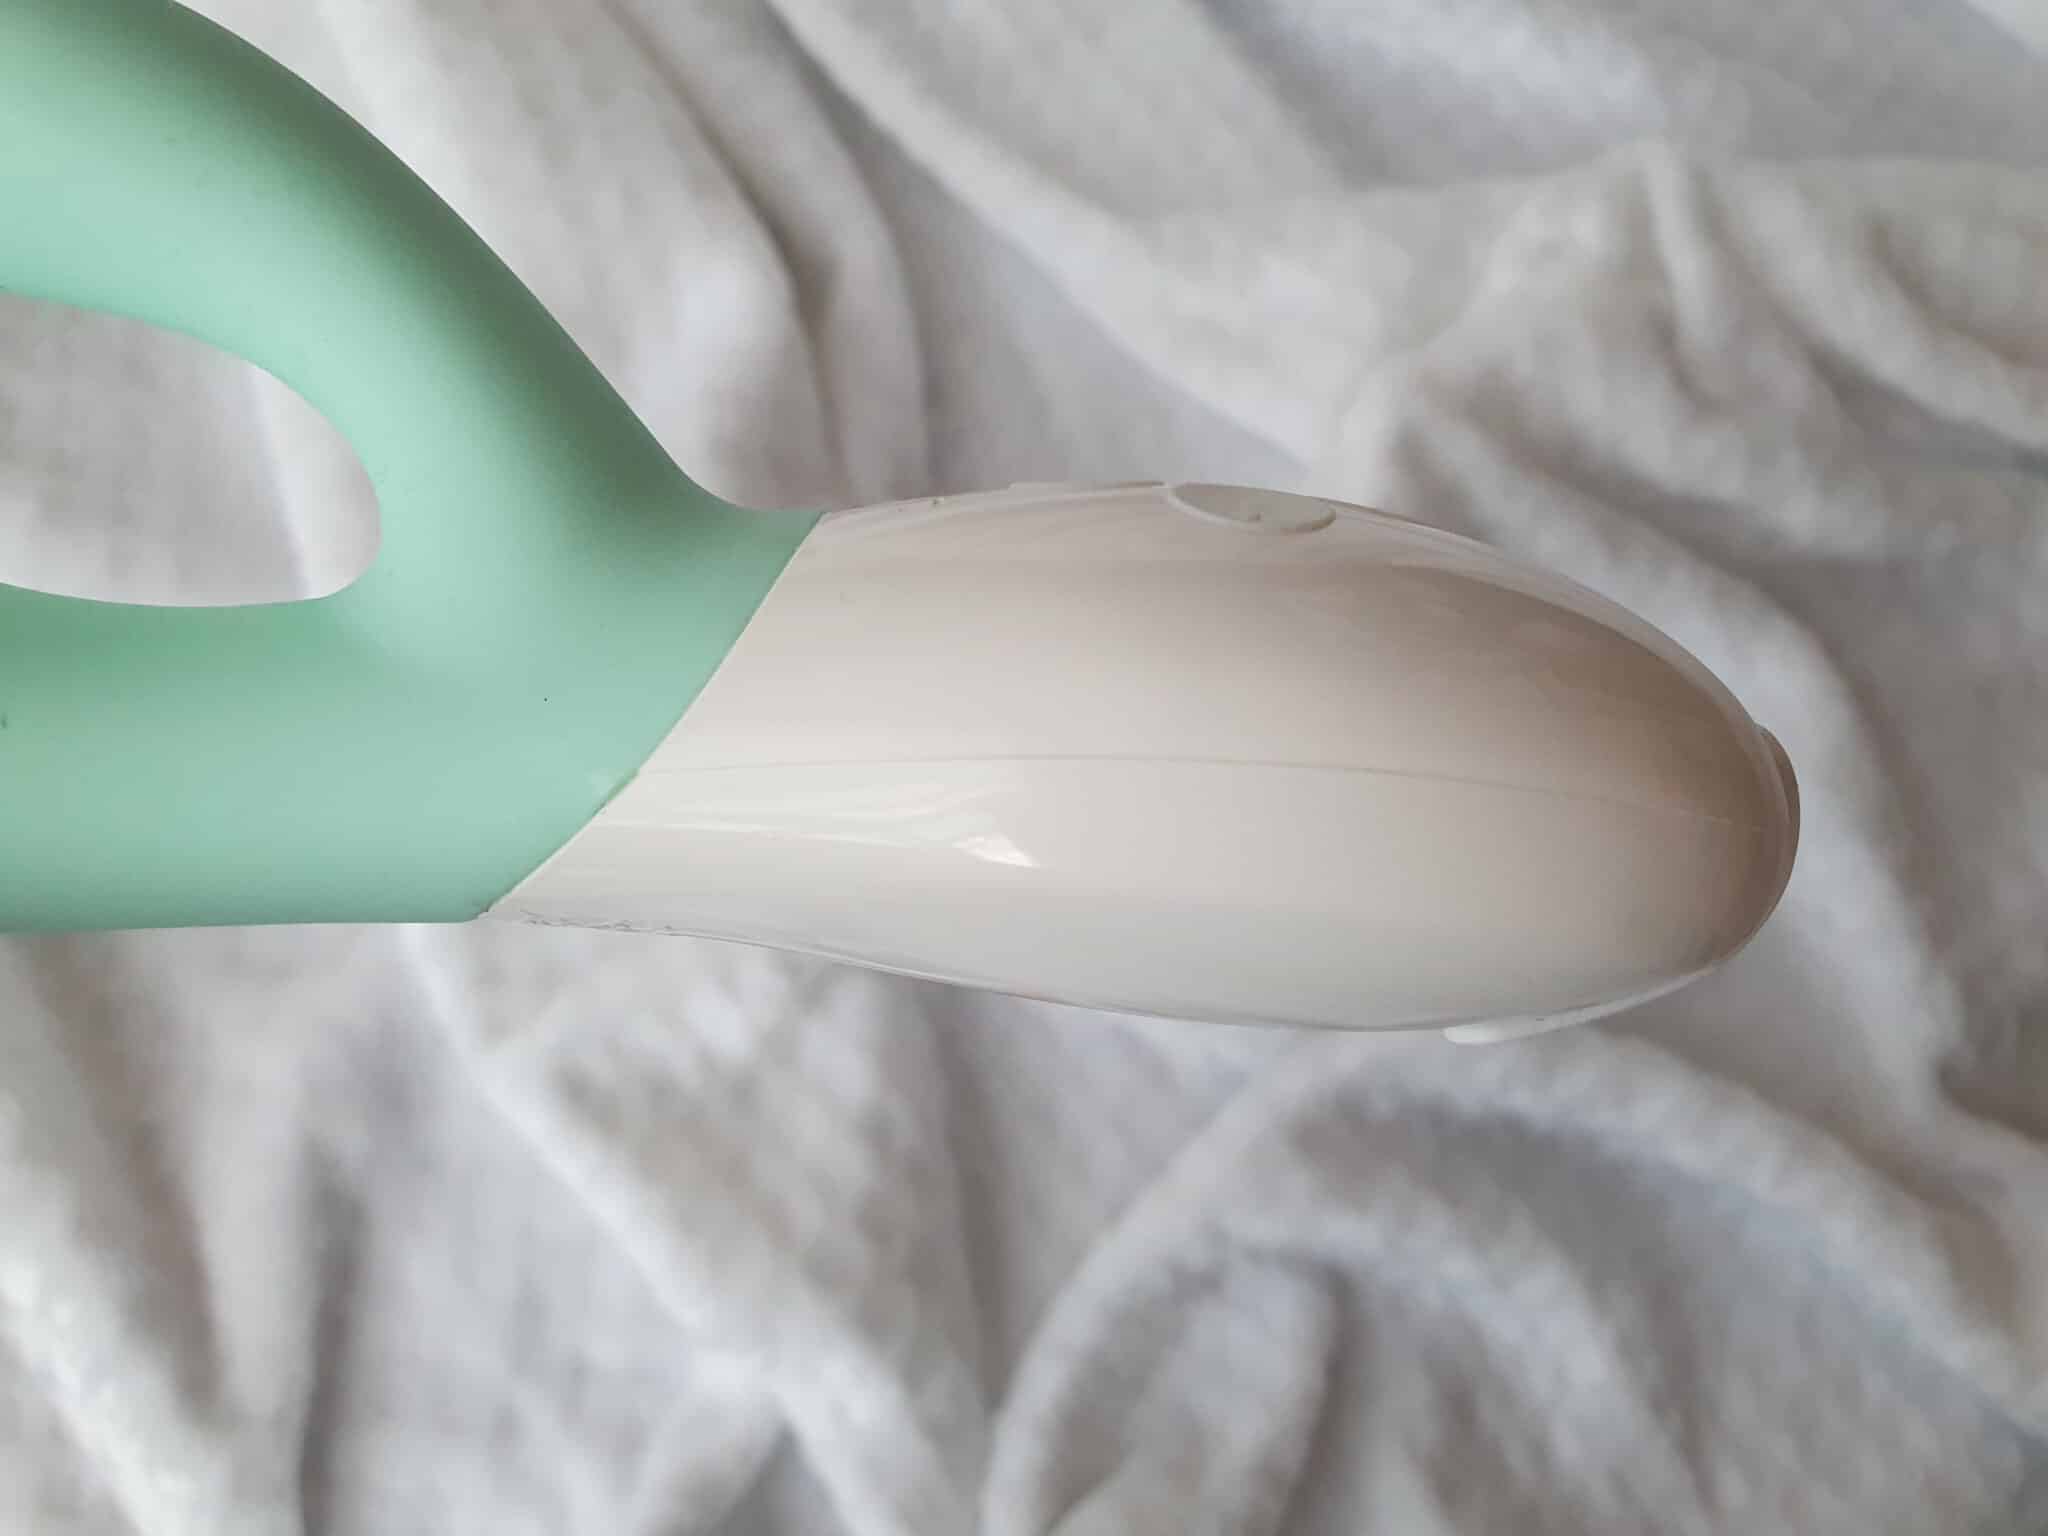 Lelo Ina 3 The Lelo Ina 3: Standout Quality or Shortcomings?